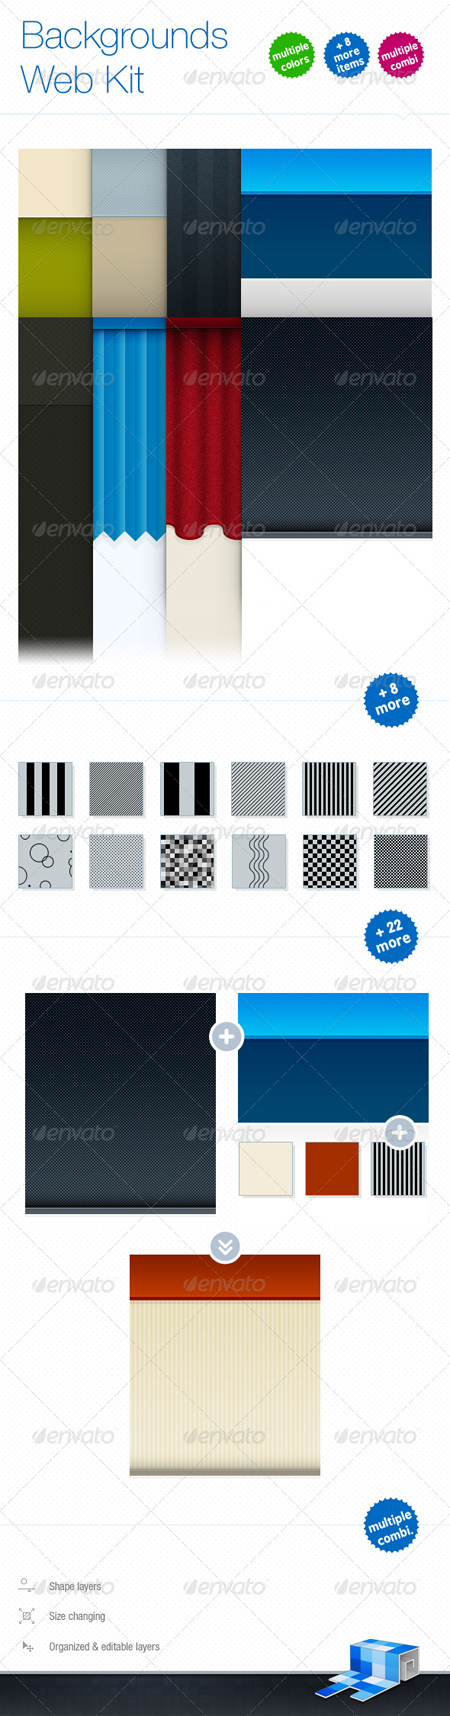 GraphicRiver Backgrounds Web Kit